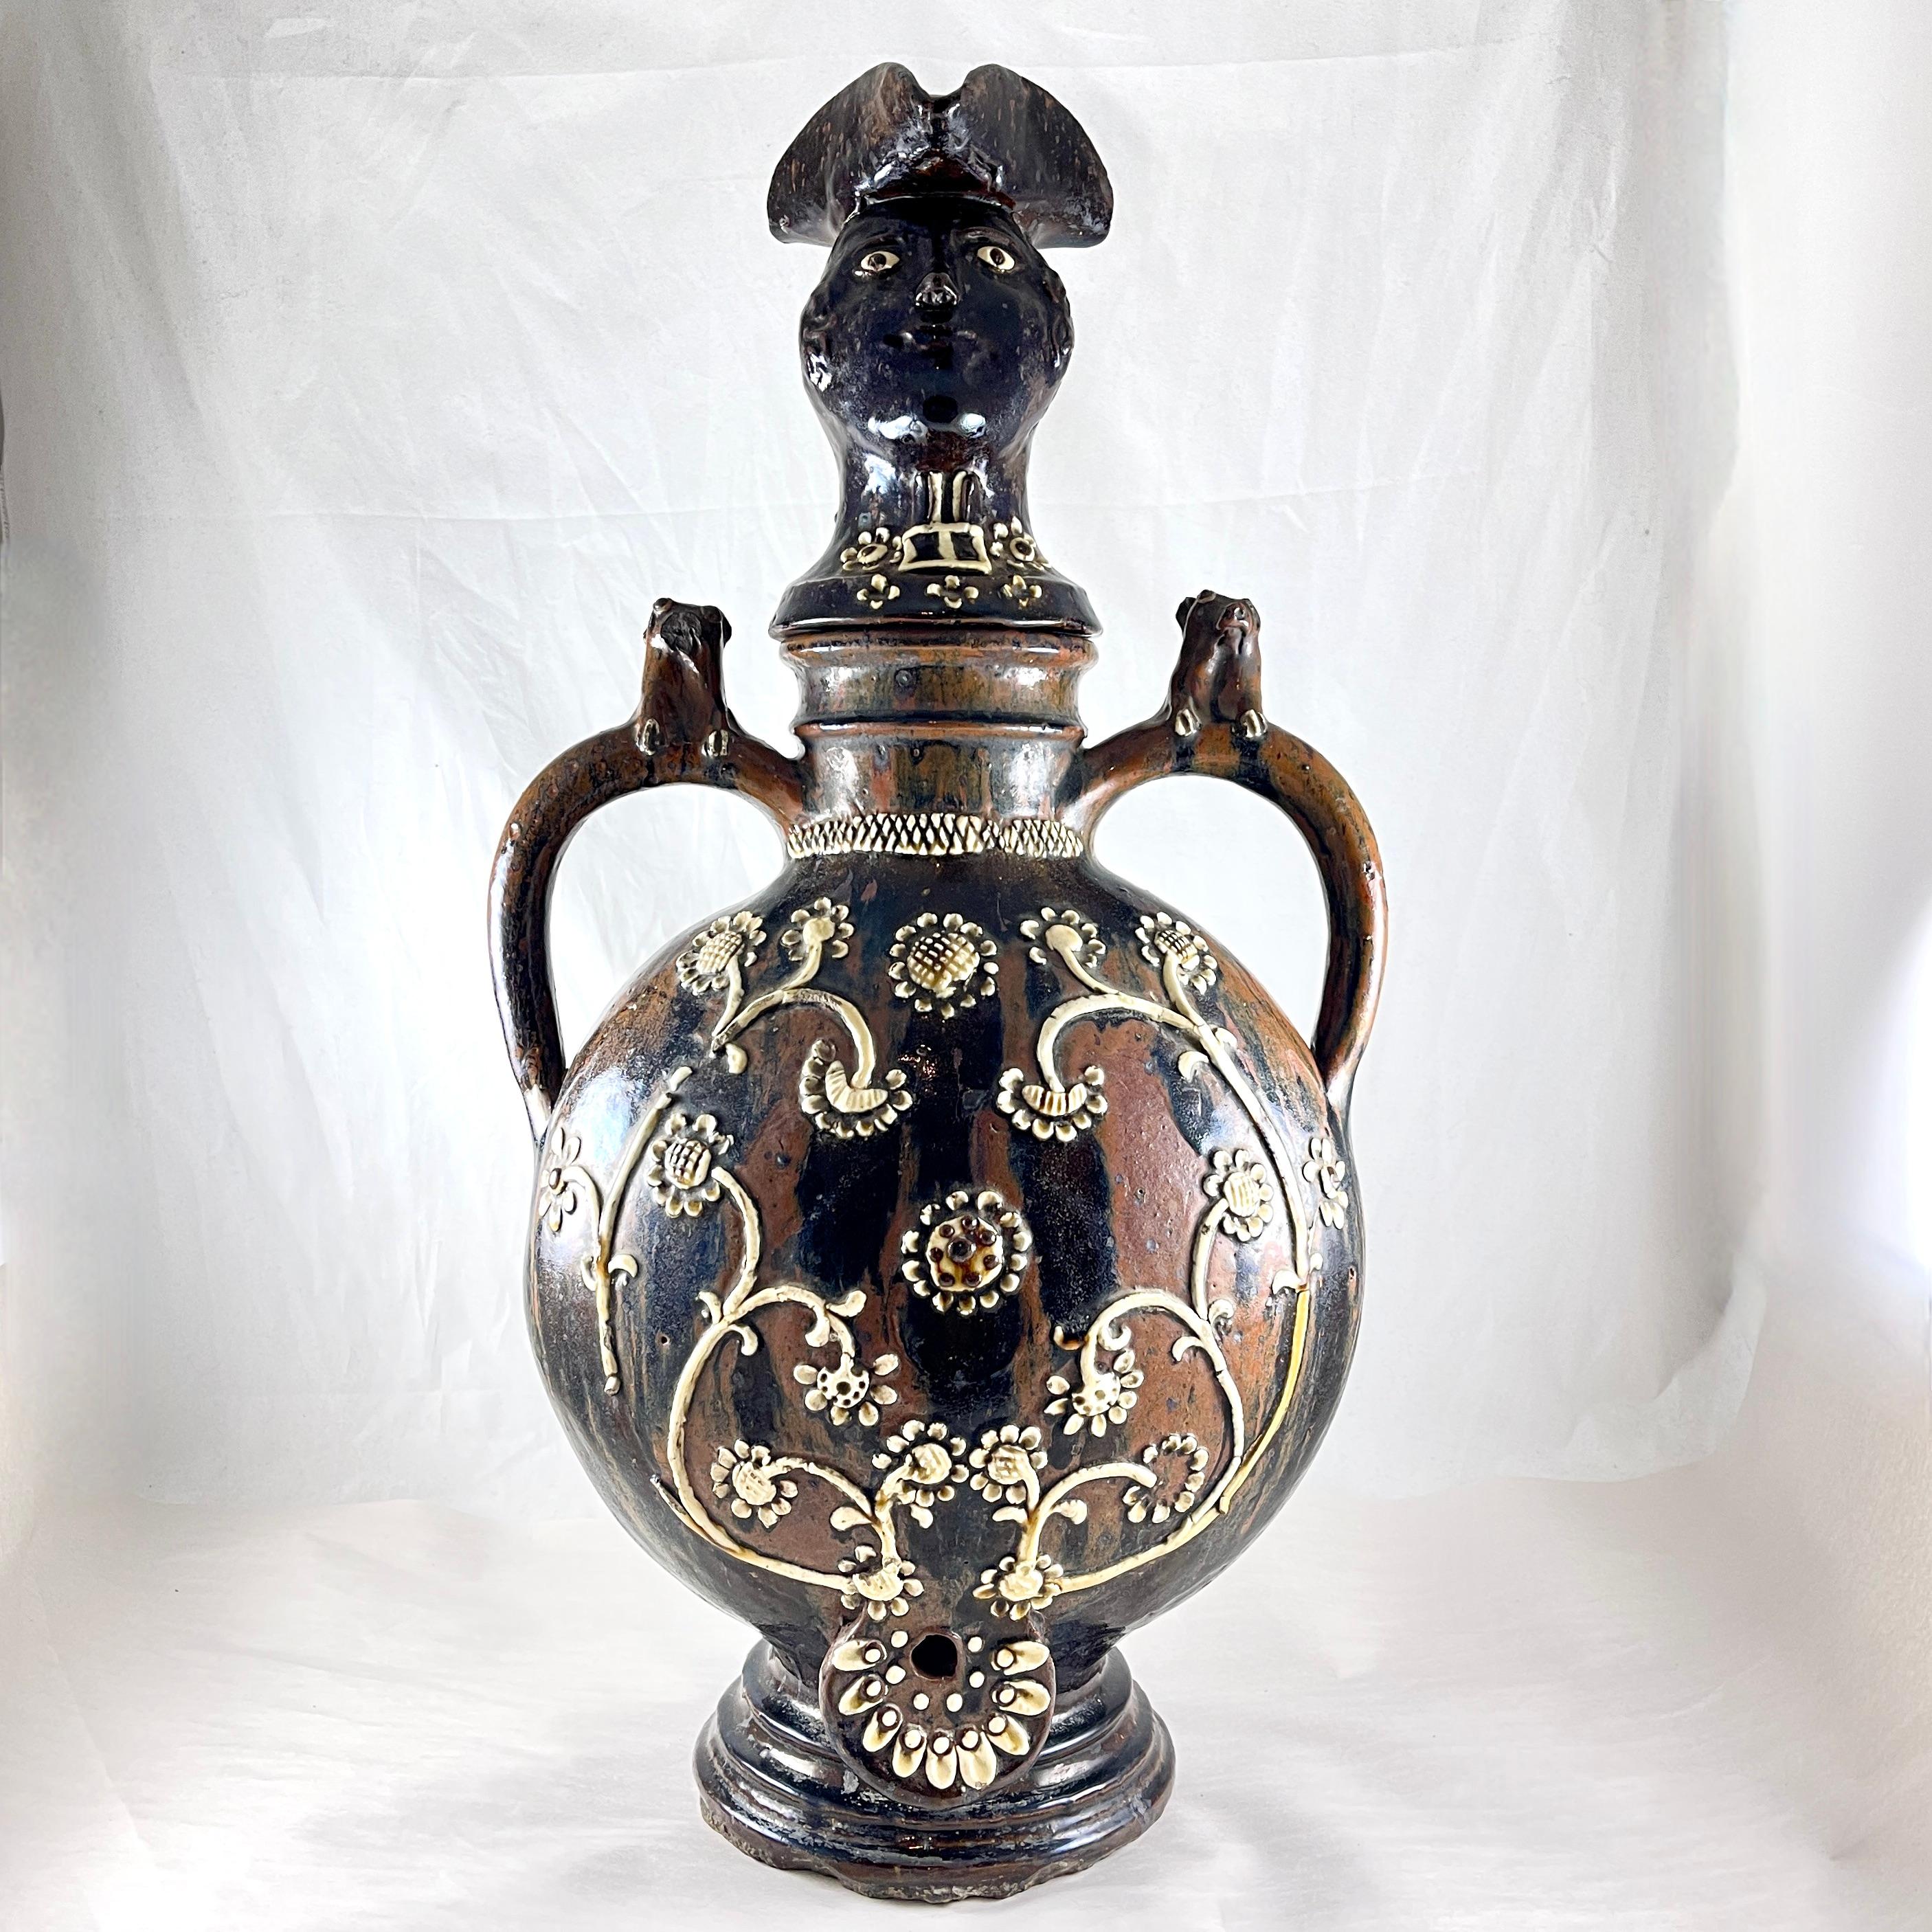 A large and heavy Vindefontaine Beverage Fountain, Normandy, France, circa 1840 – 1850.

Referred to as a fountain, this vessel was used for the storing and serving of water or wine. Glazed in a treacle glazed earthenware of brown and black with a